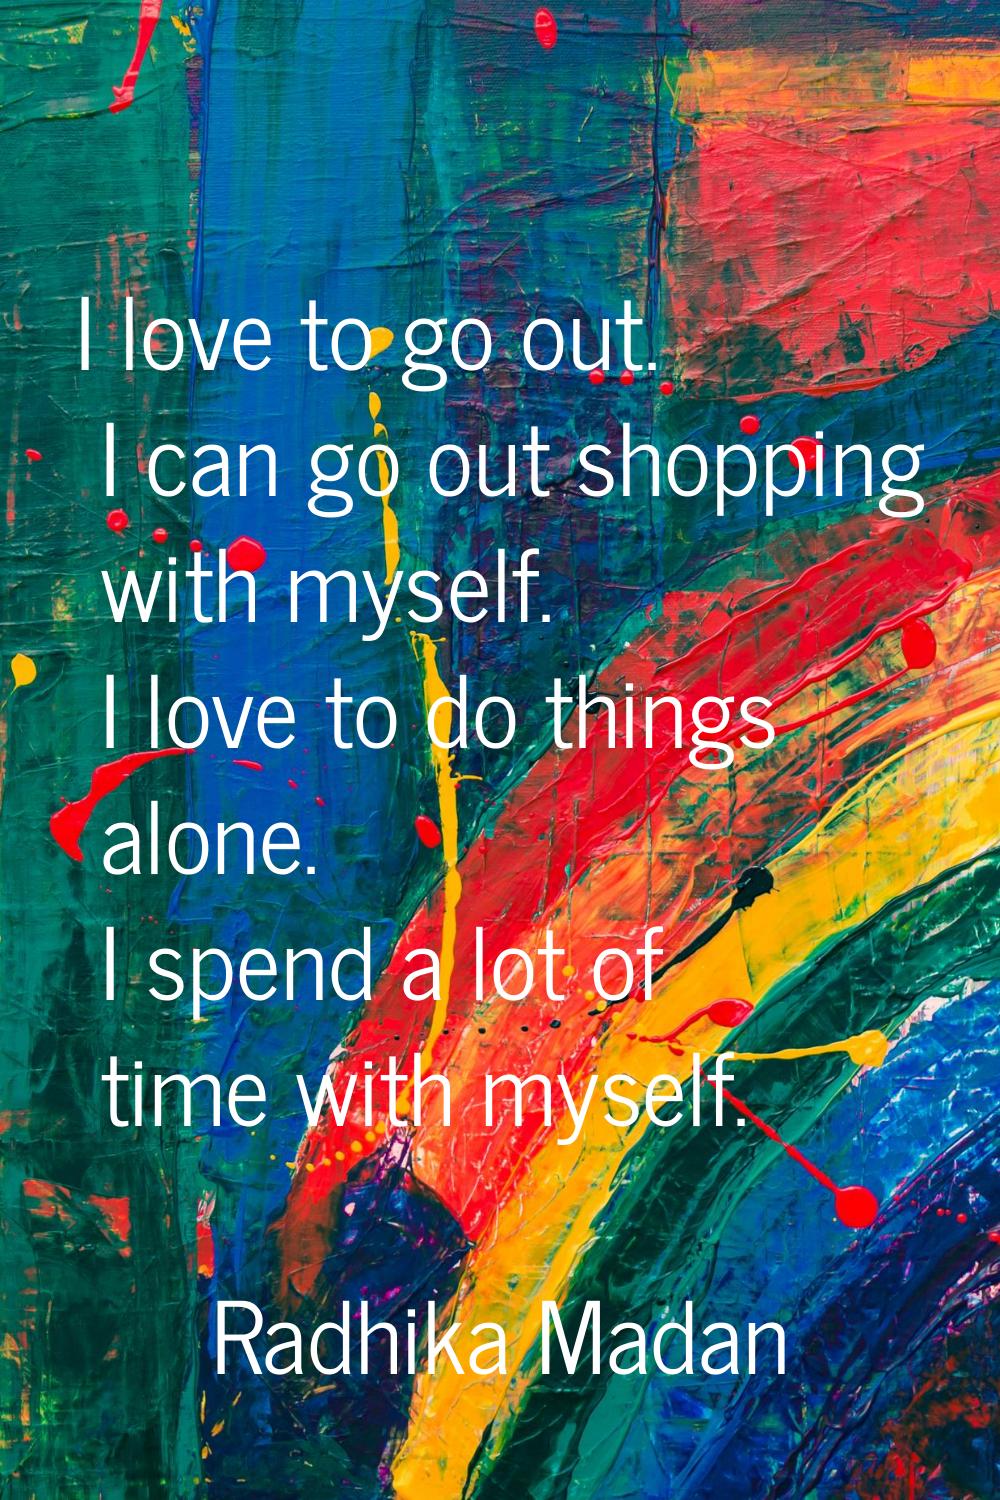 I love to go out. I can go out shopping with myself. I love to do things alone. I spend a lot of ti